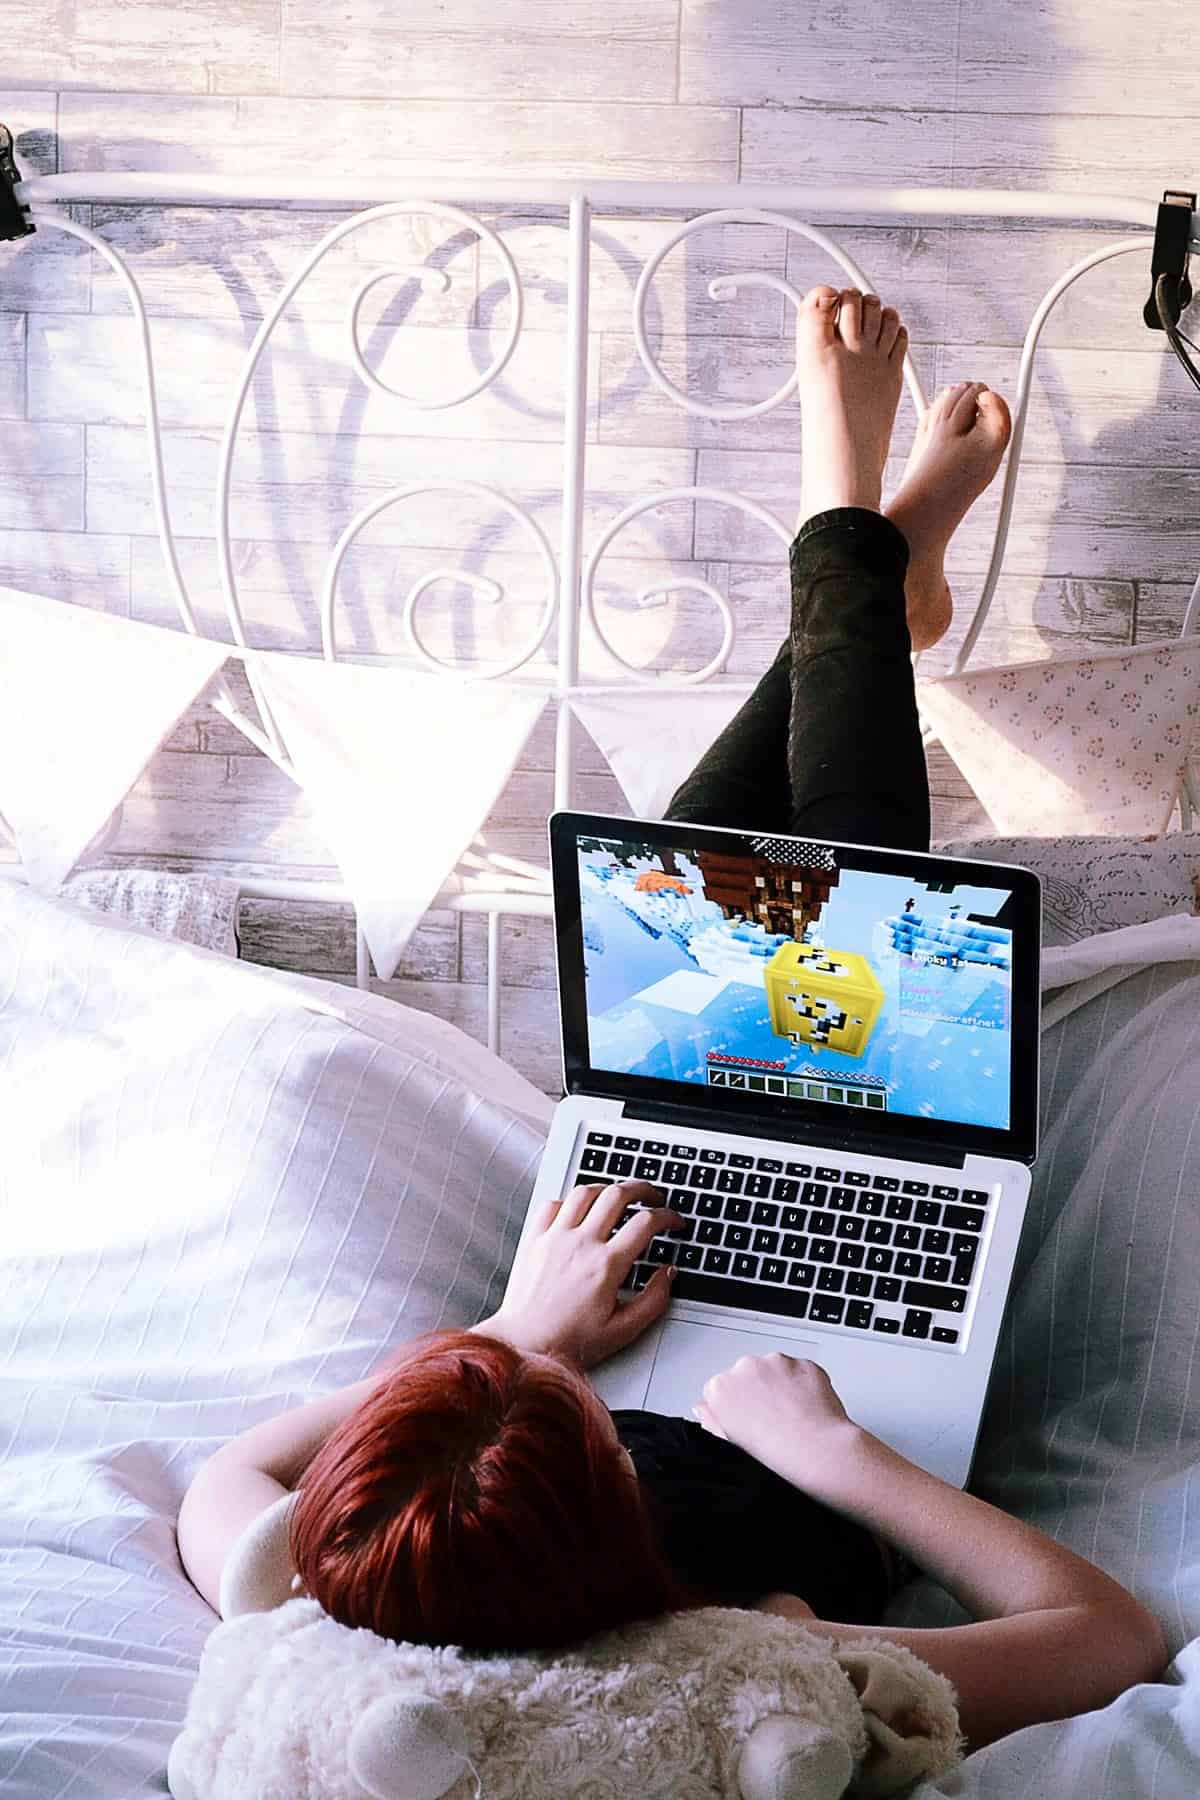 A photo of a woman lying with her feet up against a headboard, playing games on a laptop.